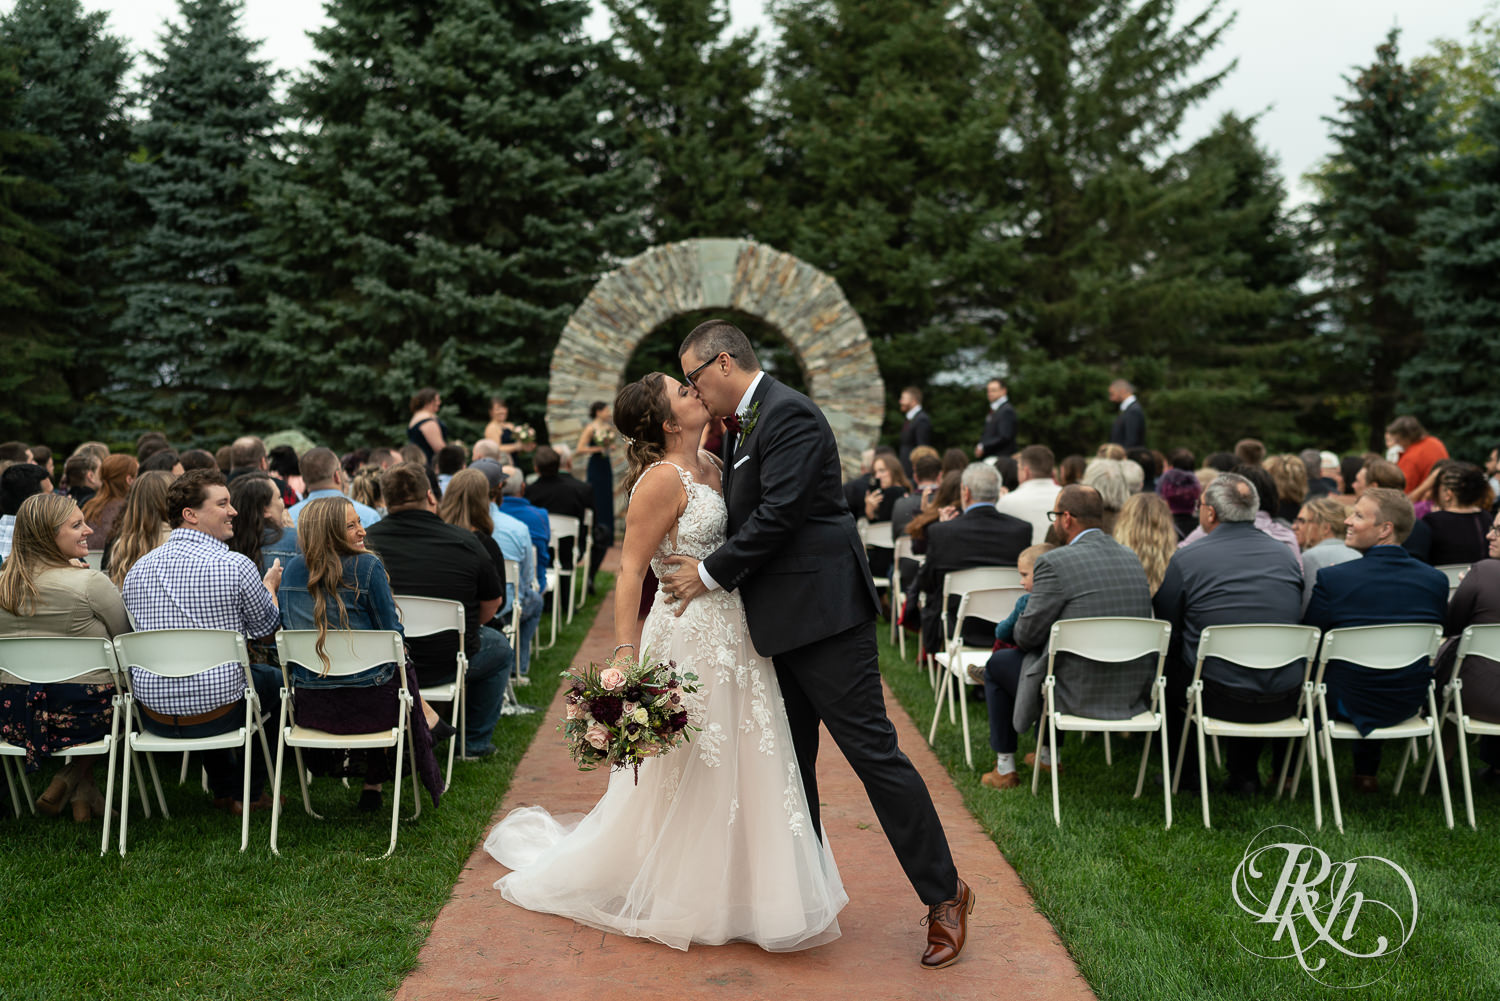 Bride and groom kiss after ceremony on rainy day at Glenhaven Events in Farmington, Minnesota.